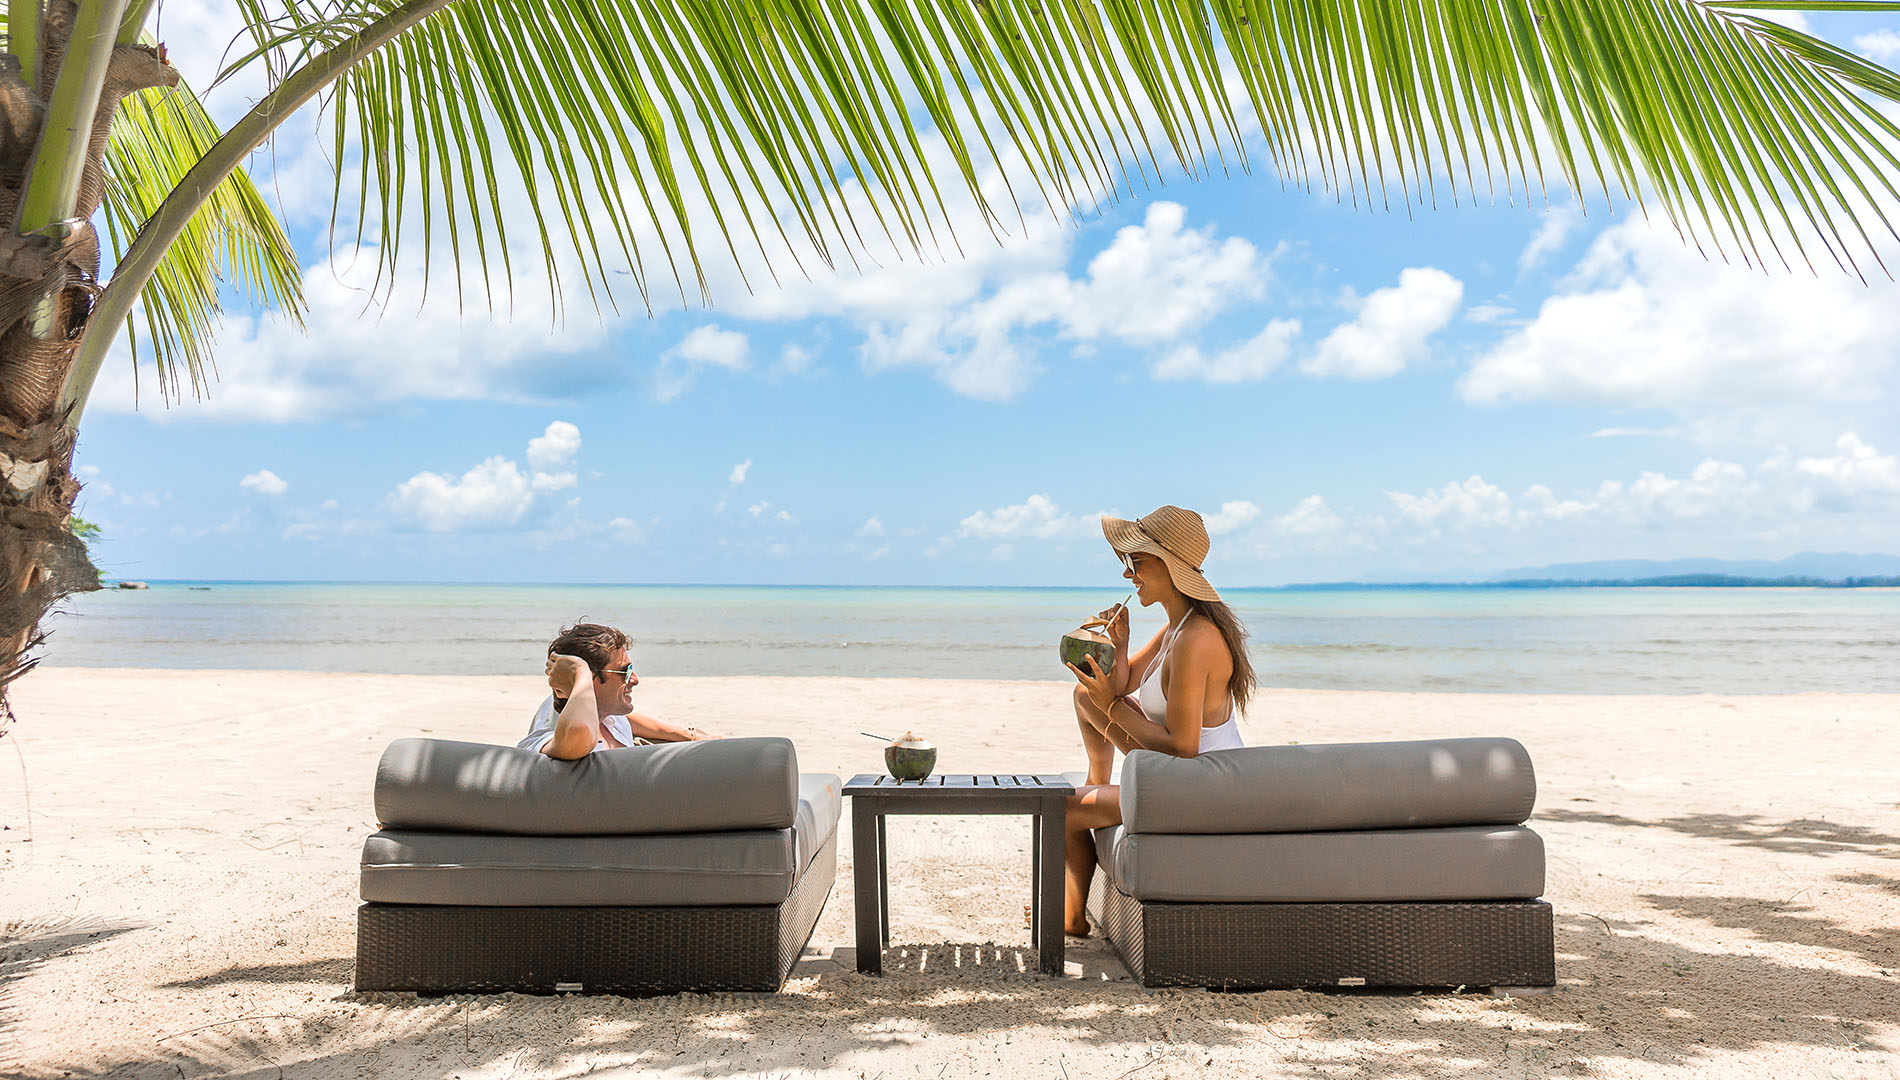 A man and woman sit on two plush chairs on a beach